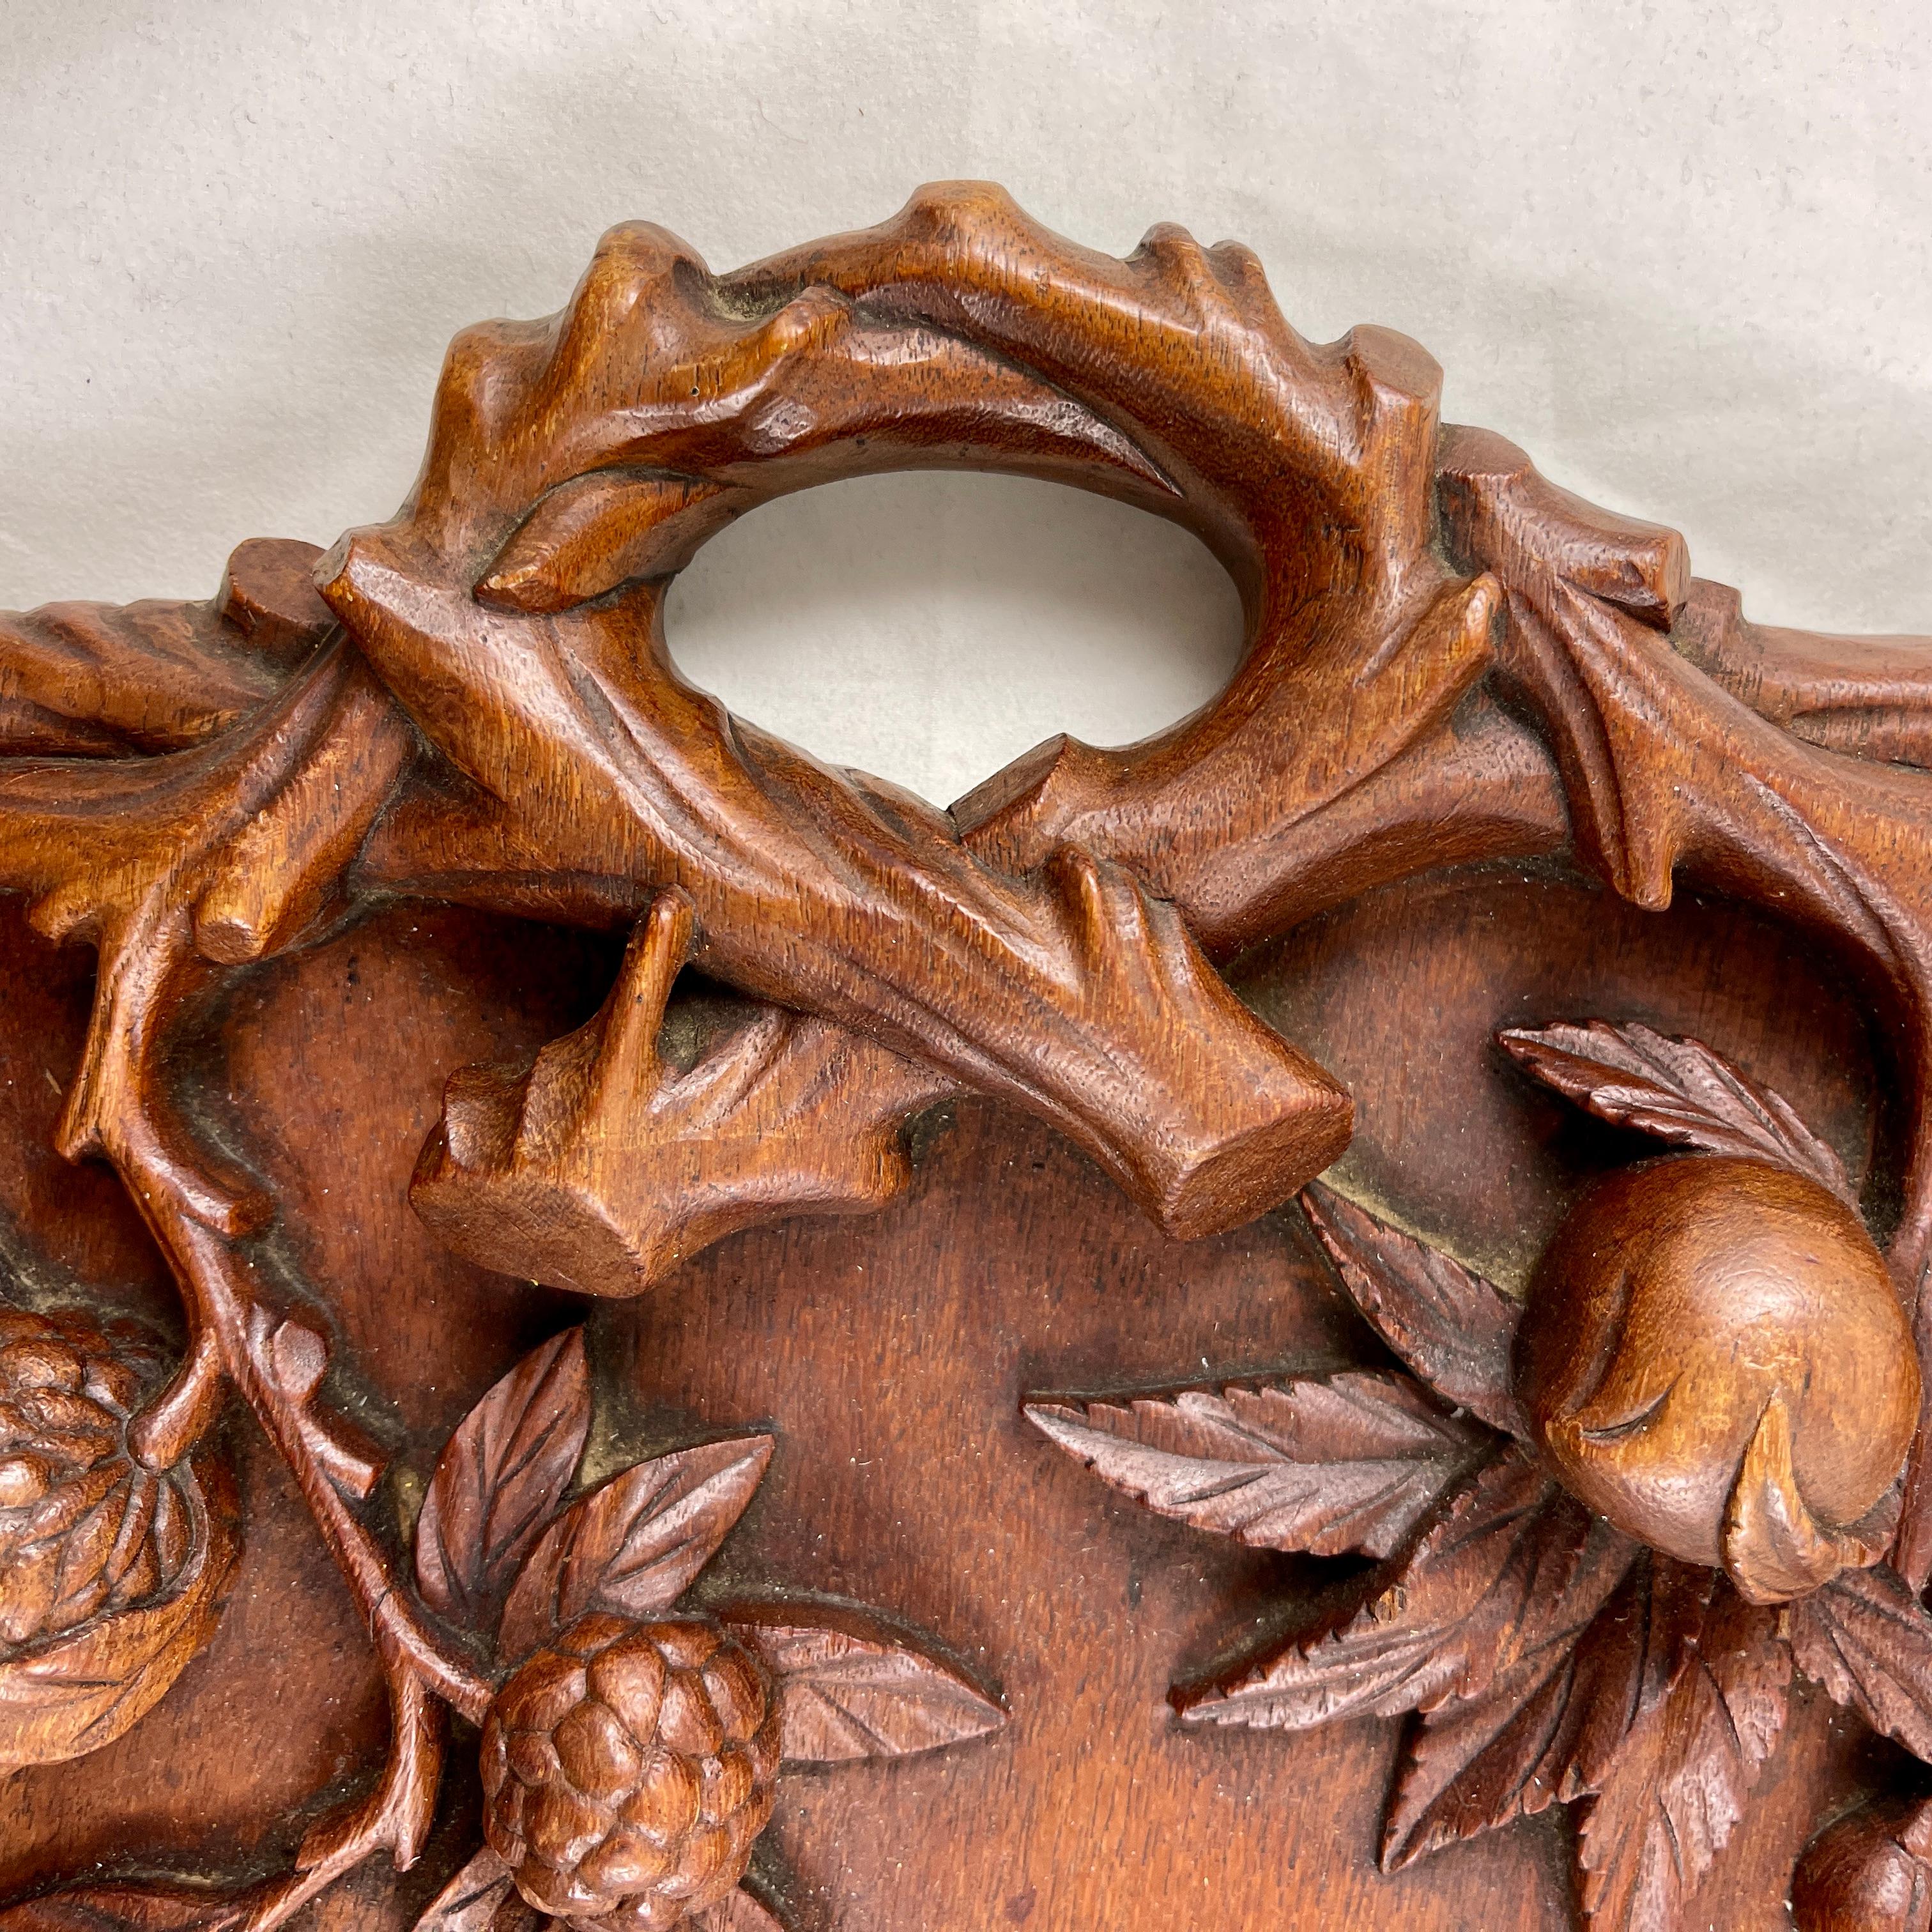 An exquisitely hand-carved Black Forest wooden serving tray, circa mid-late 19th Century.

A stunning, open handled tray showing branching exotic fruit – pomegranates, passionfruit, persimmons, and custard apples. The fruit is shown in clusters